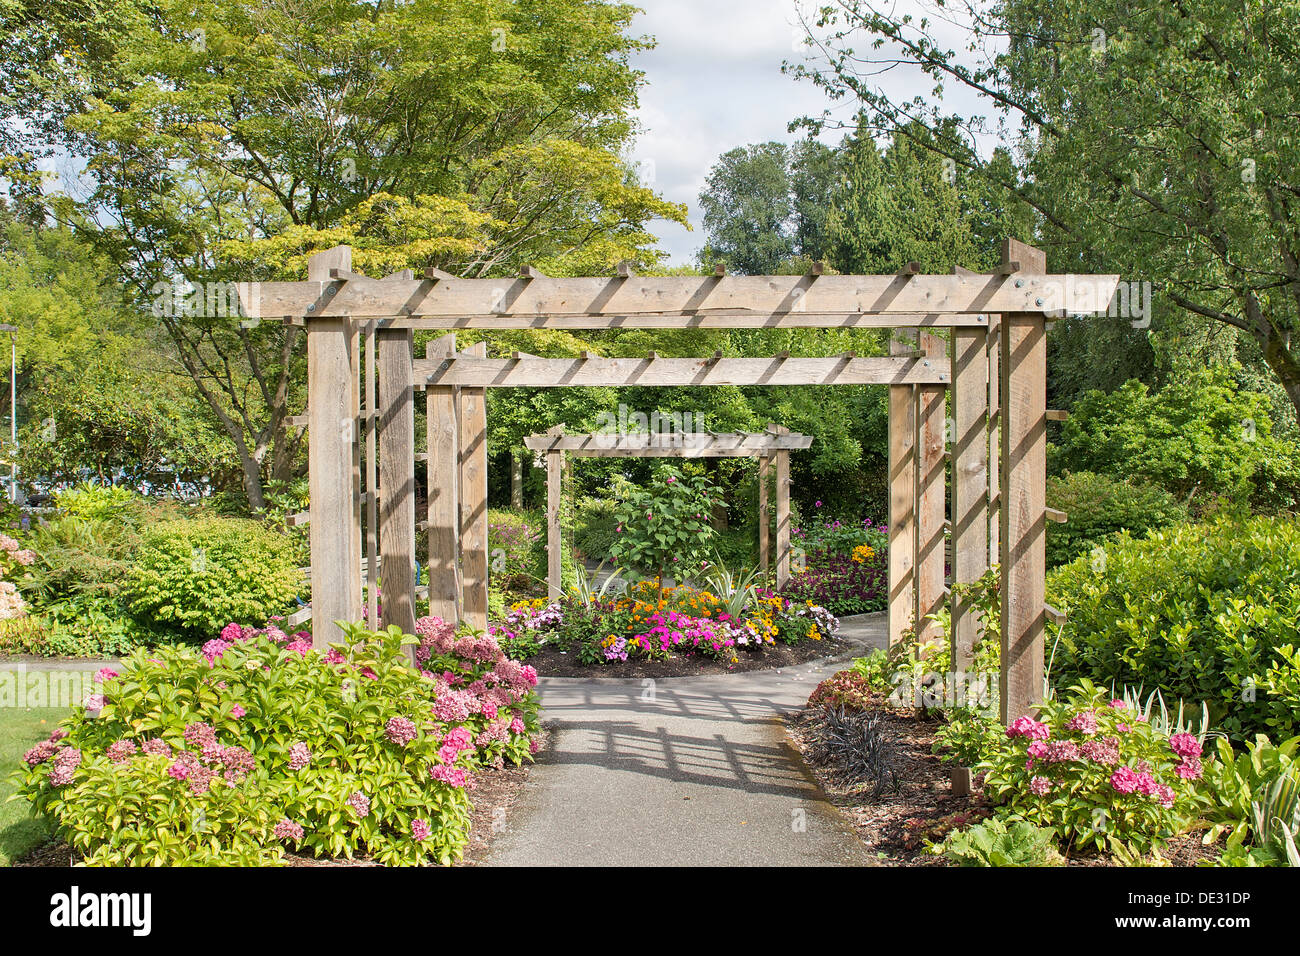 Wood Arbor Over Garden Path with Plants Trees and Flowers Blooming in Summer Stock Photo